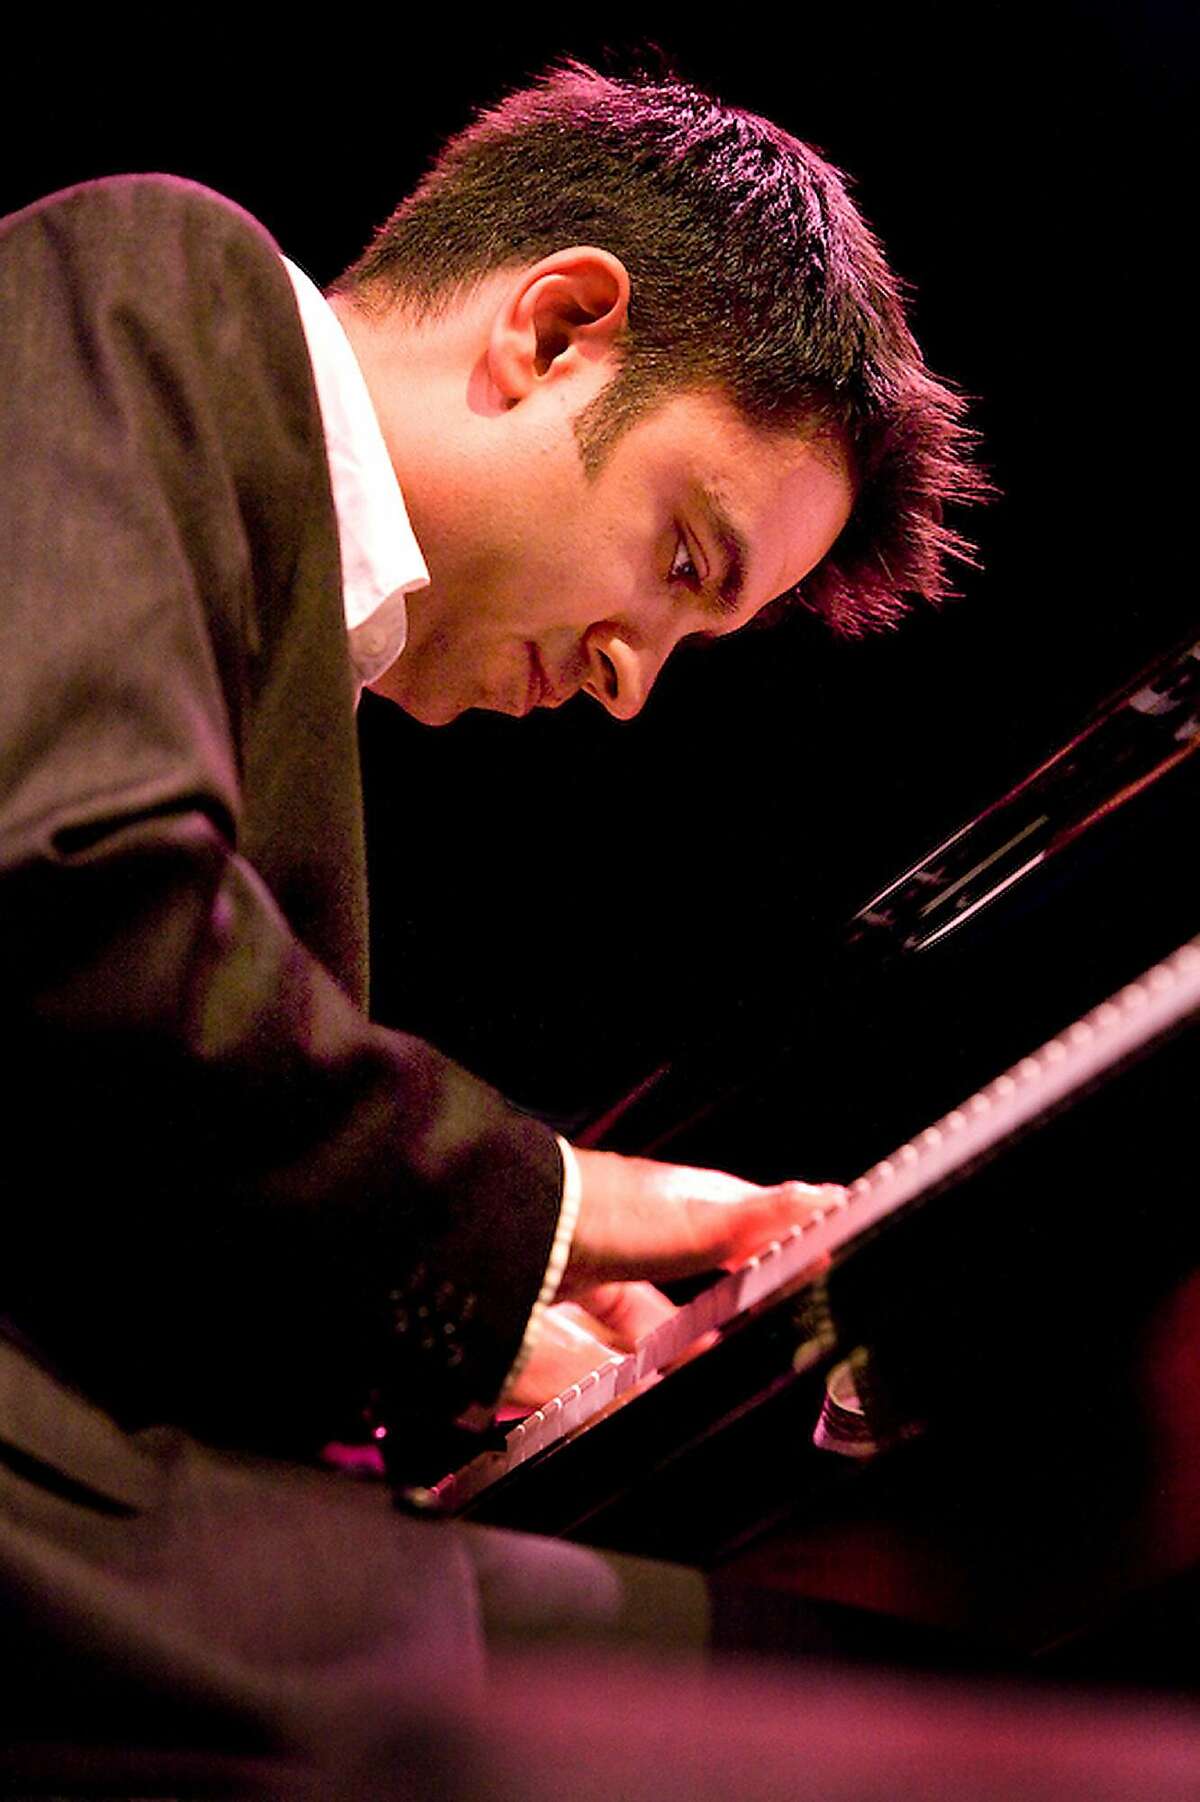 Pianist and composer Vijay Iyer, one of 24 innovators in various fields awarded a MacArthur Foundation "genius" grant last month, performs solo on a San Francisco Performances bill at the SFJAZZ Center Nov. 16. Photo by Hans Speekenbrink.